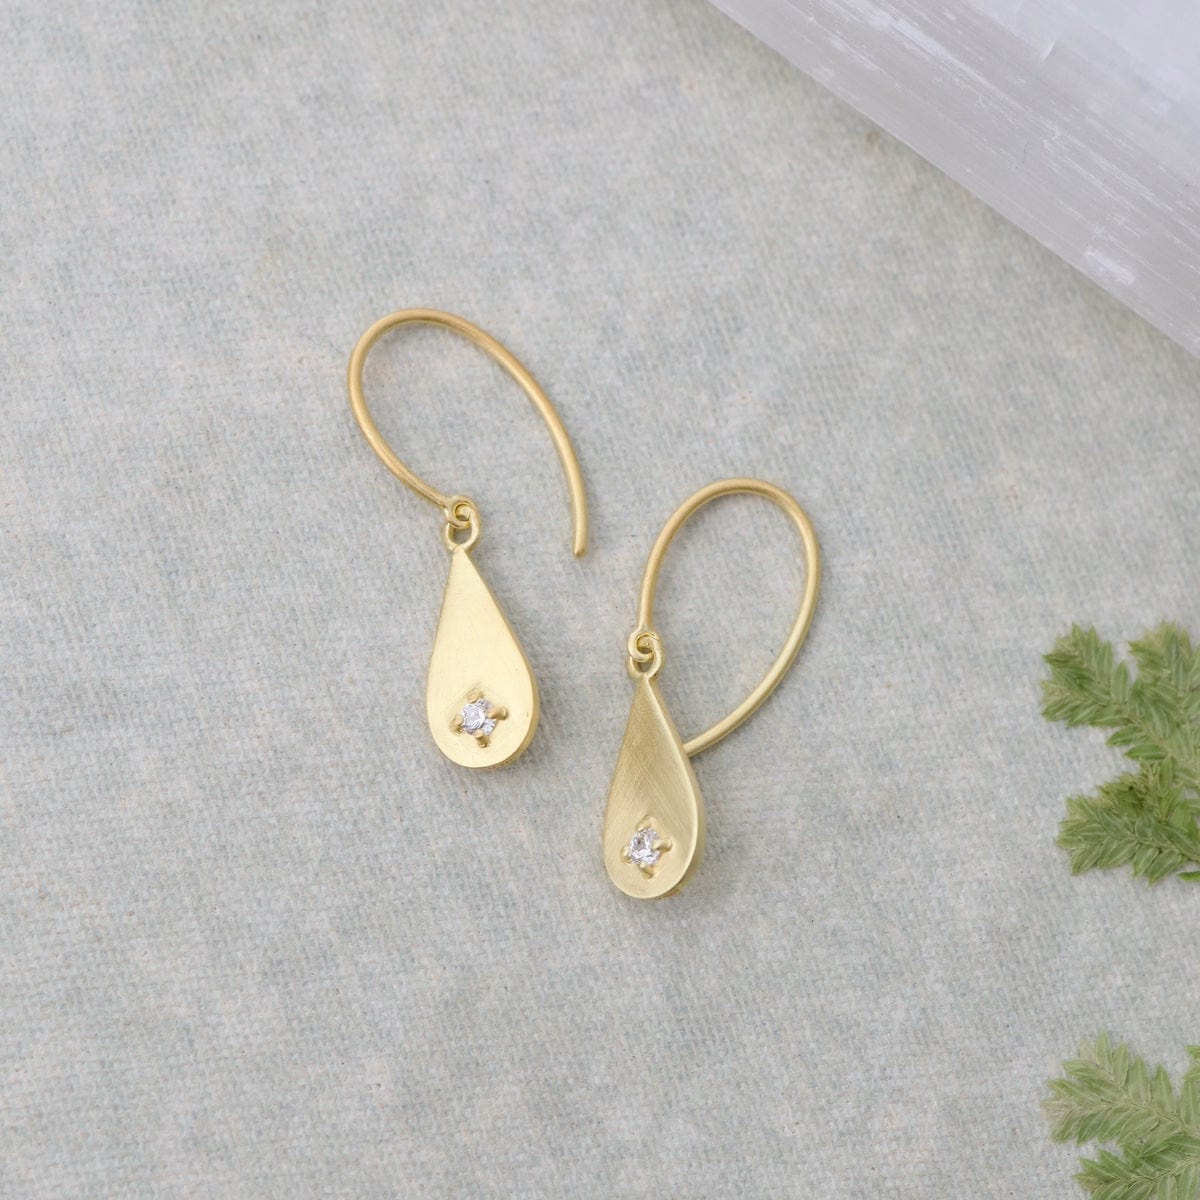 EAR-VRM Dewdrop with CZ on Oval Hook Earrings- Brushed Gold Vermeil